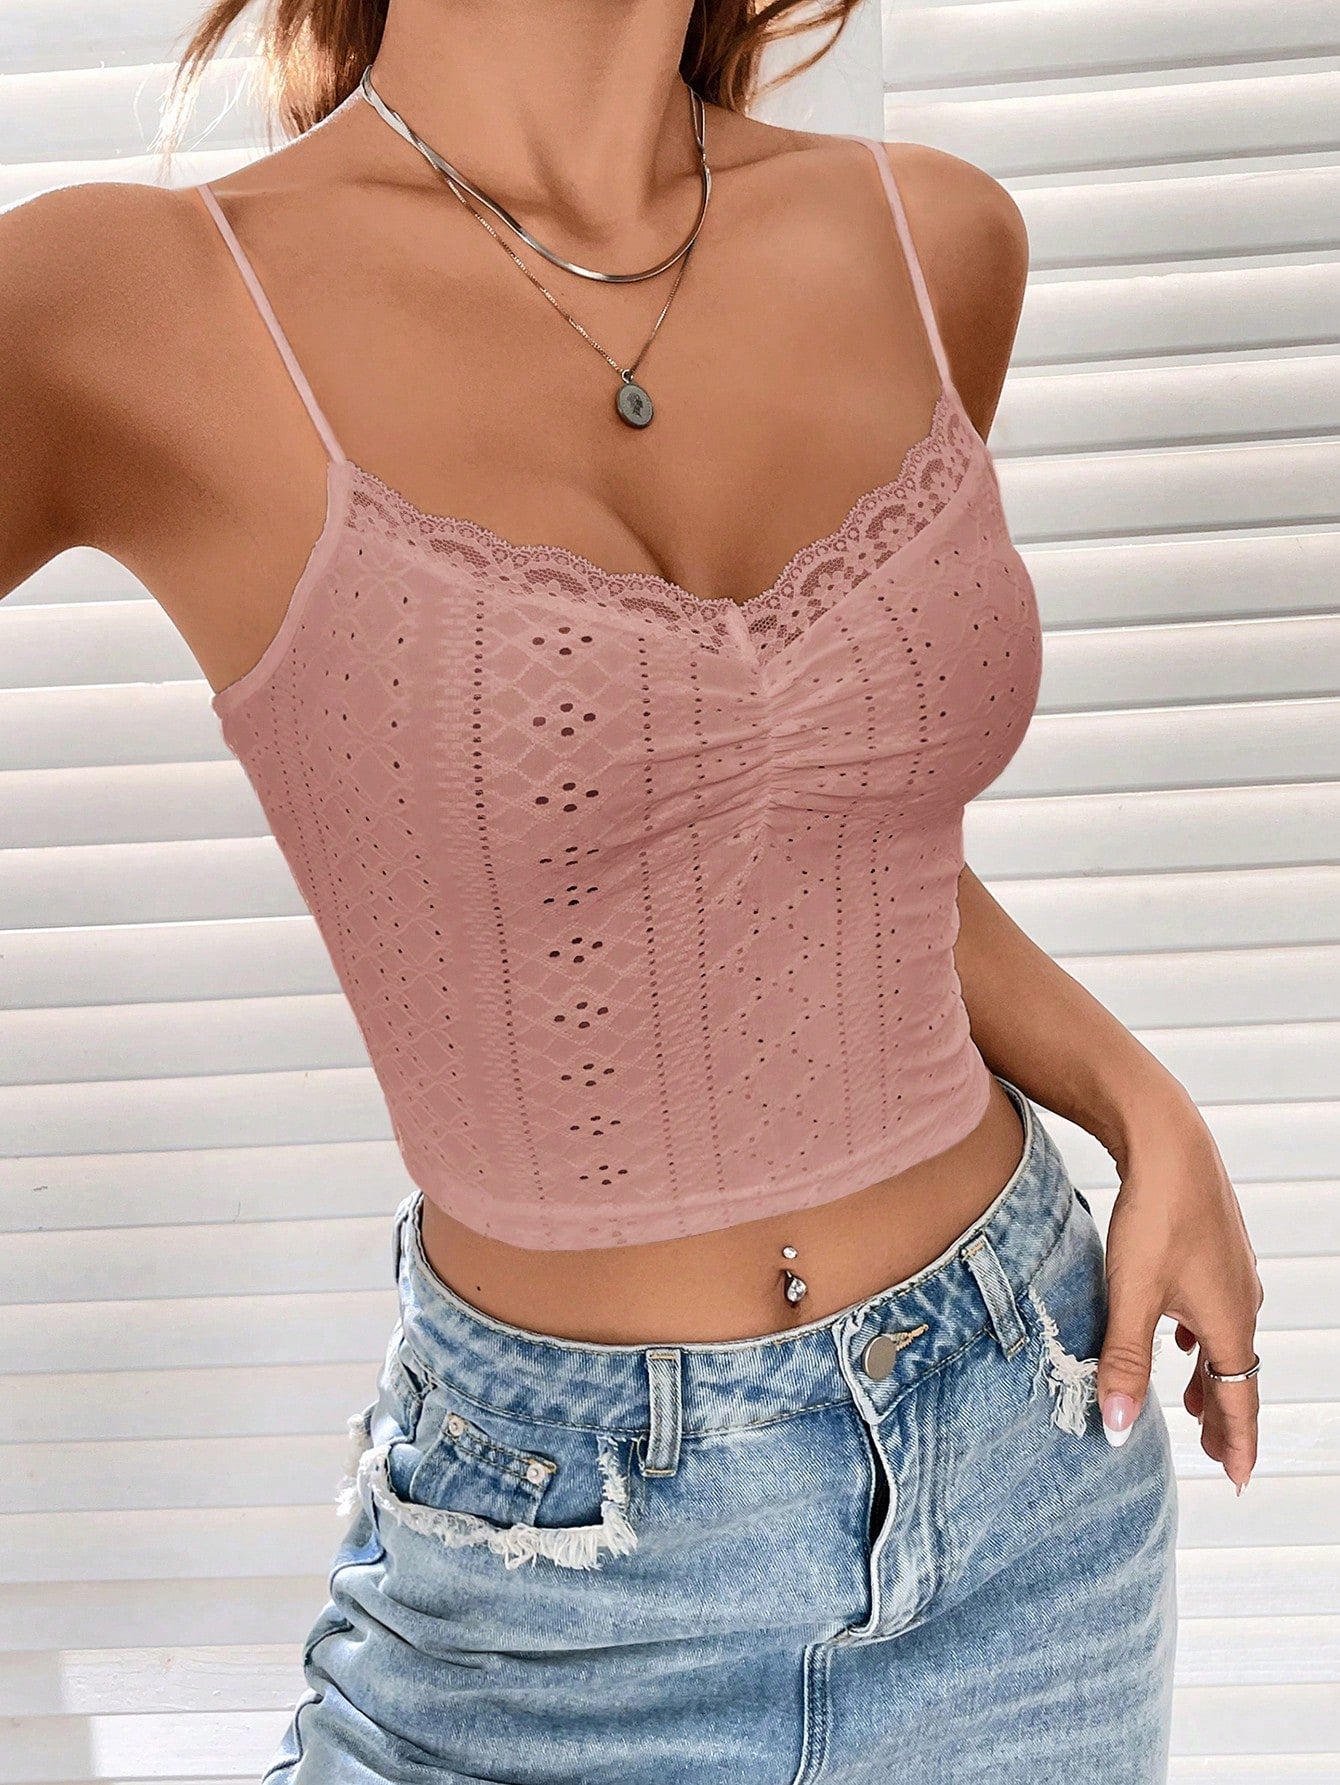 SheIn Women's Lace Casual Camisole Cami Crop Tank Tops Lingerie Bustier  Spaghetti Strap Crop Top